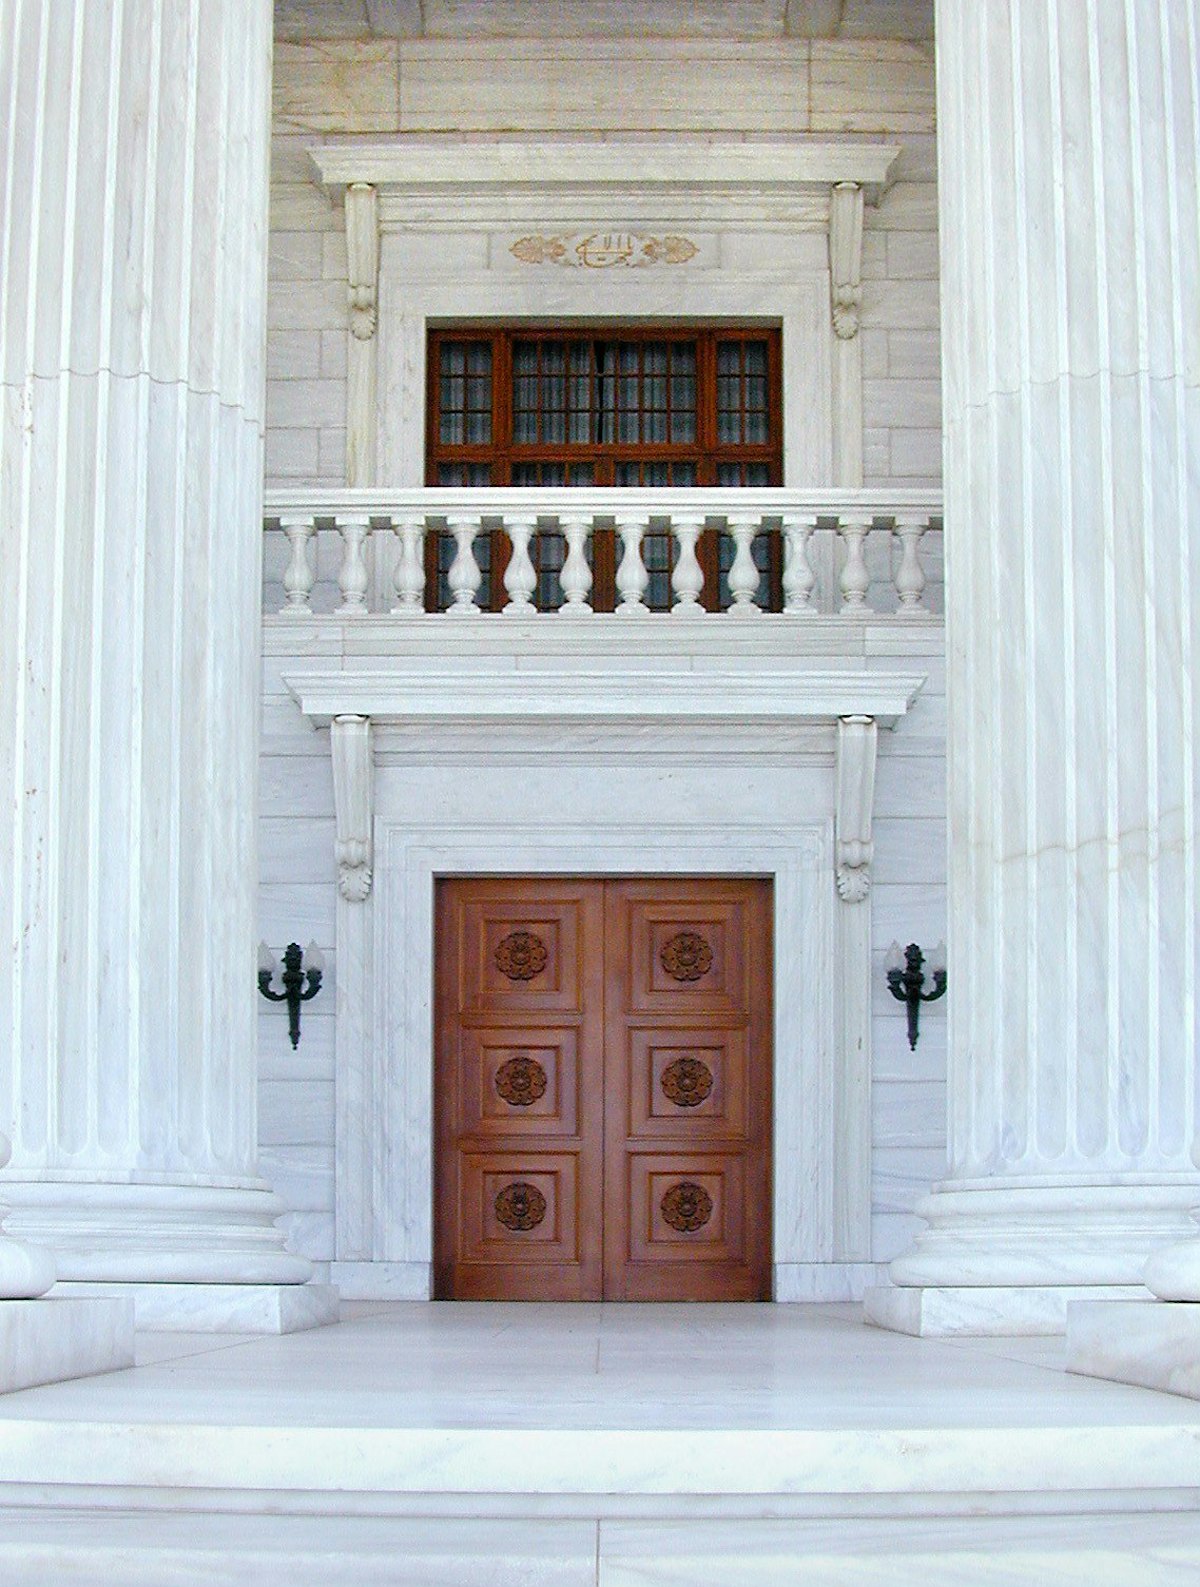 The entrance to the Seat of the Universal House of Justice, the home of the Baha'i Faith's international governing body.